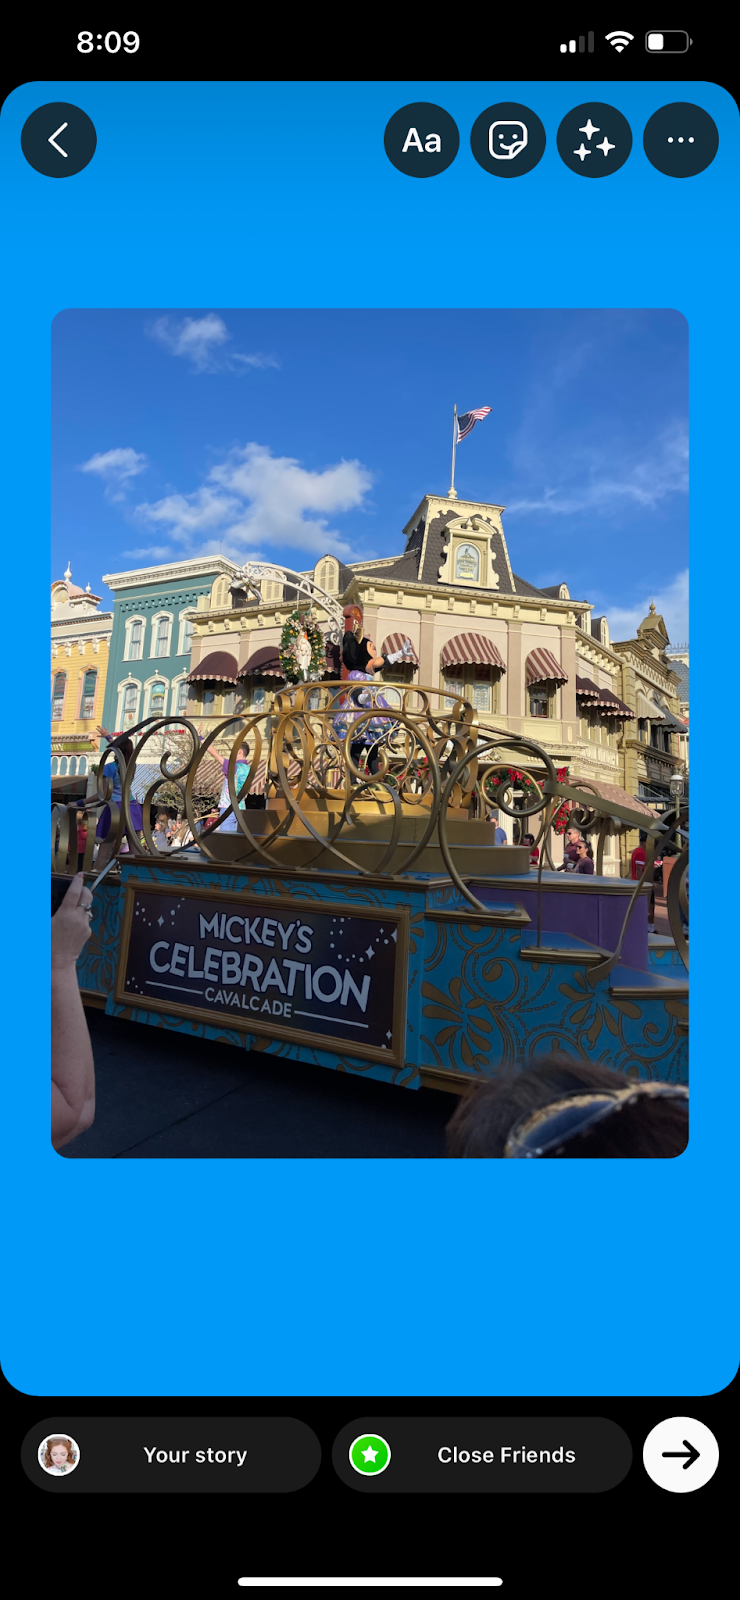 disney photo with blue background on instagram